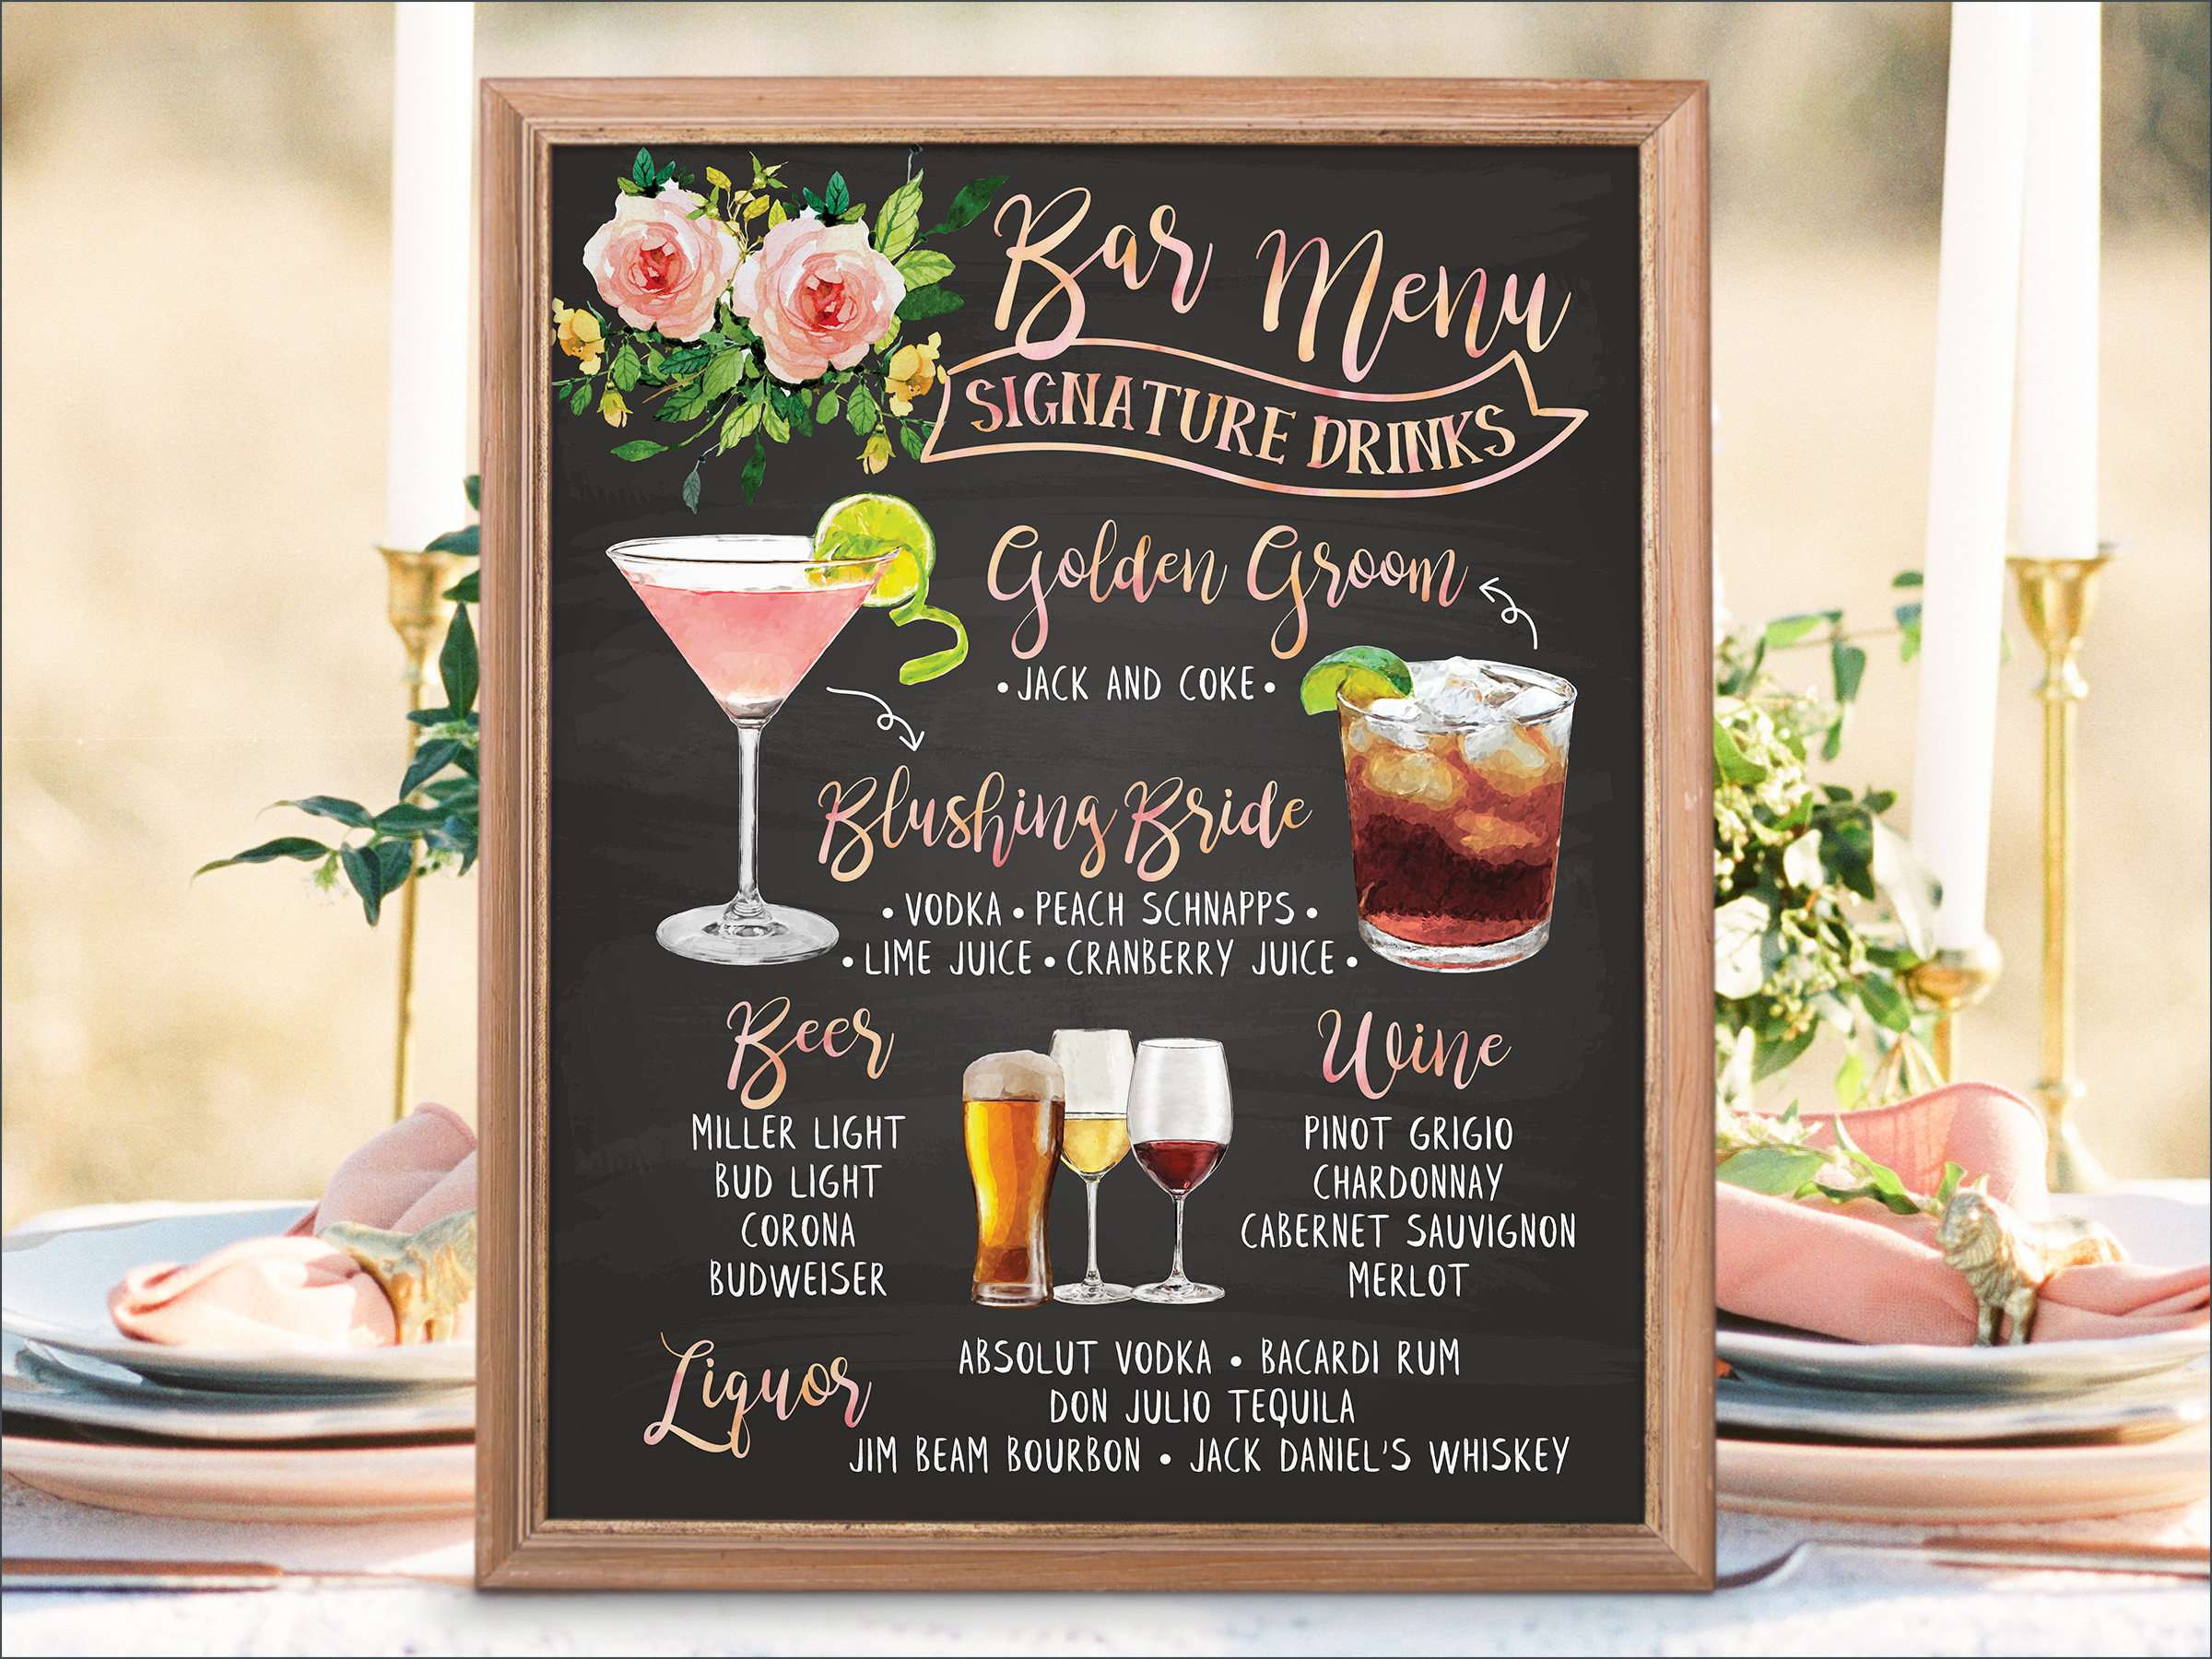 10+ Birthday Party Menu Designs and Examples